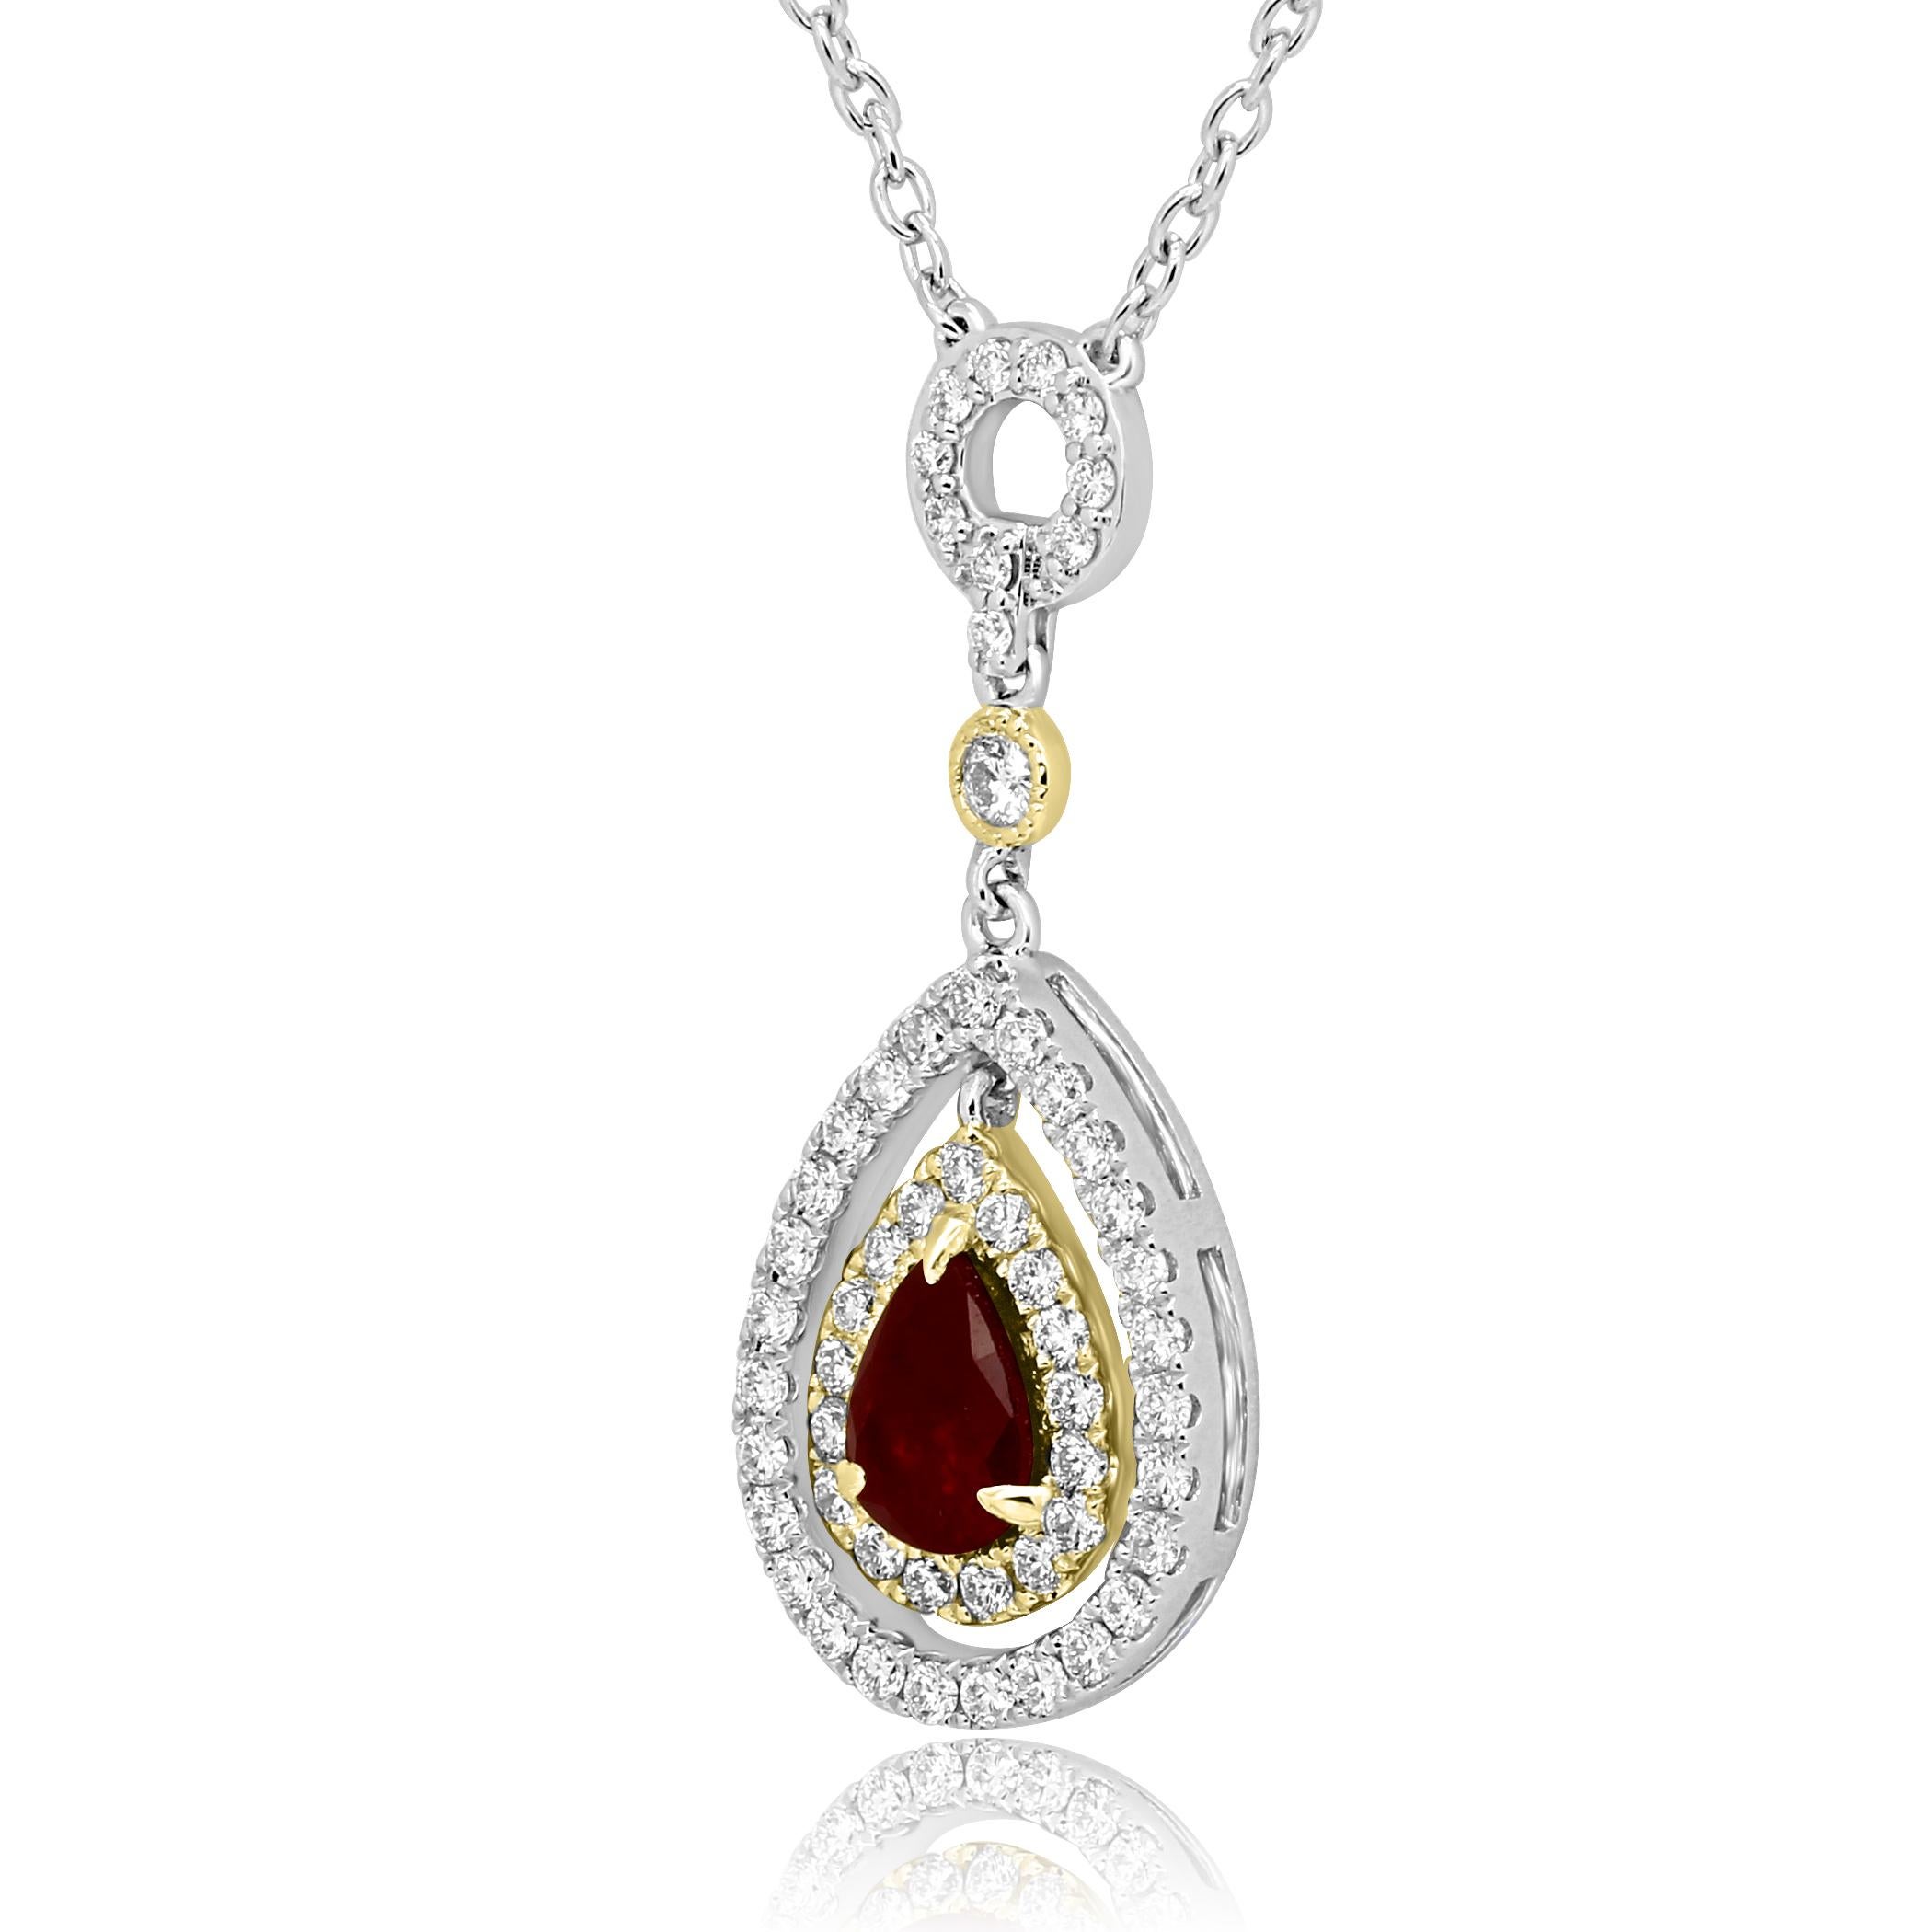 Ruby Pear 0.93 Carat Encircled in Double Halo of White Round Diamonds 0.81 Carat with Diamond By Yard Necklace in 14K White and Yellow Gold Stunning Pendant Necklace.

Center Ruby Pear Weight 0.93 Carat
Total Weight 1.74 Carat.